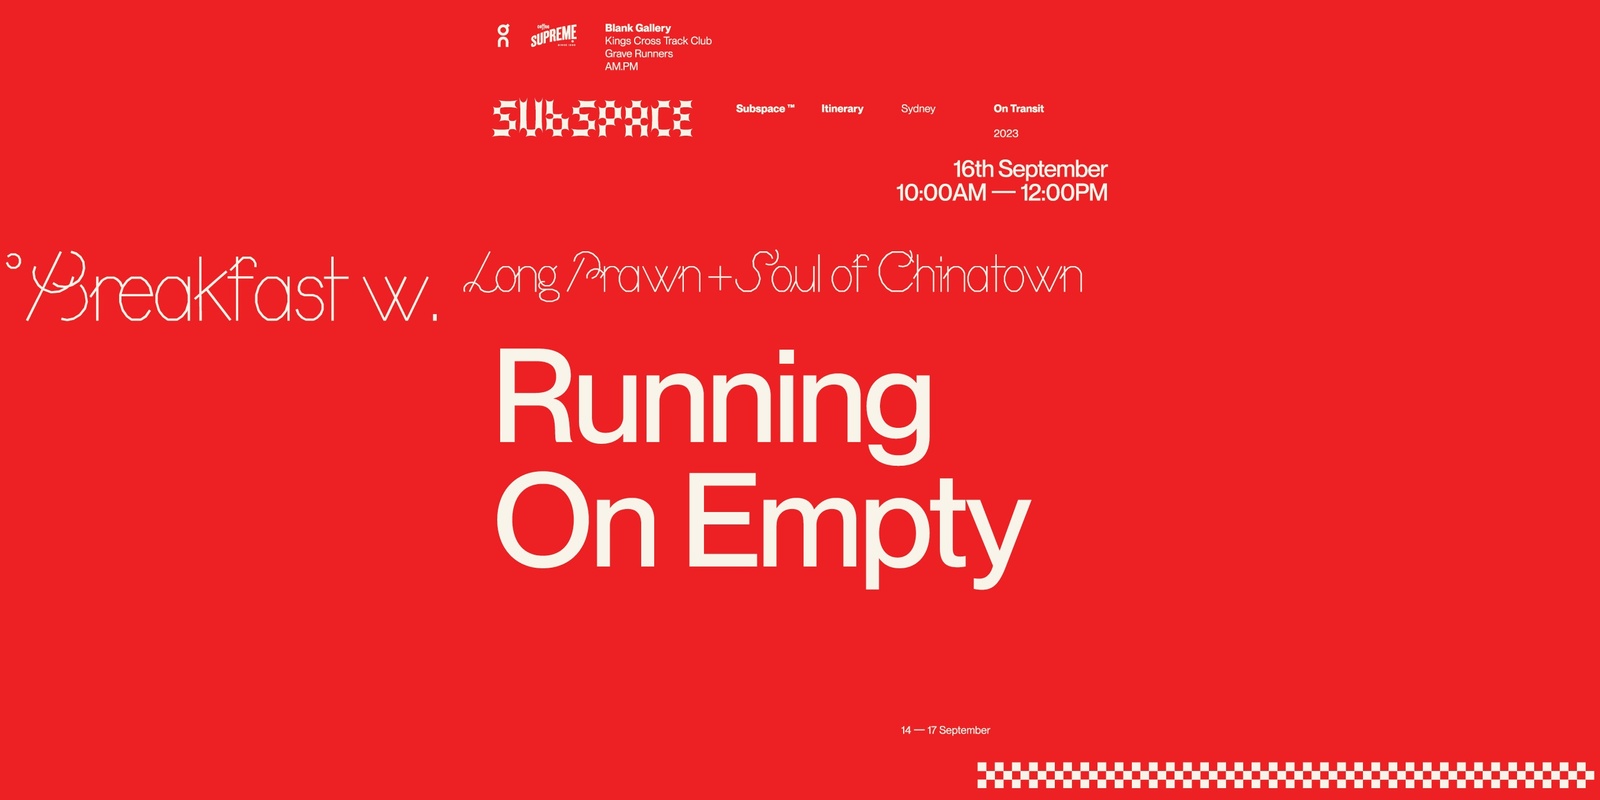 Banner image for Running On Empty ⏤ Breakfast w. Soul of Chinatown + Long Prawn